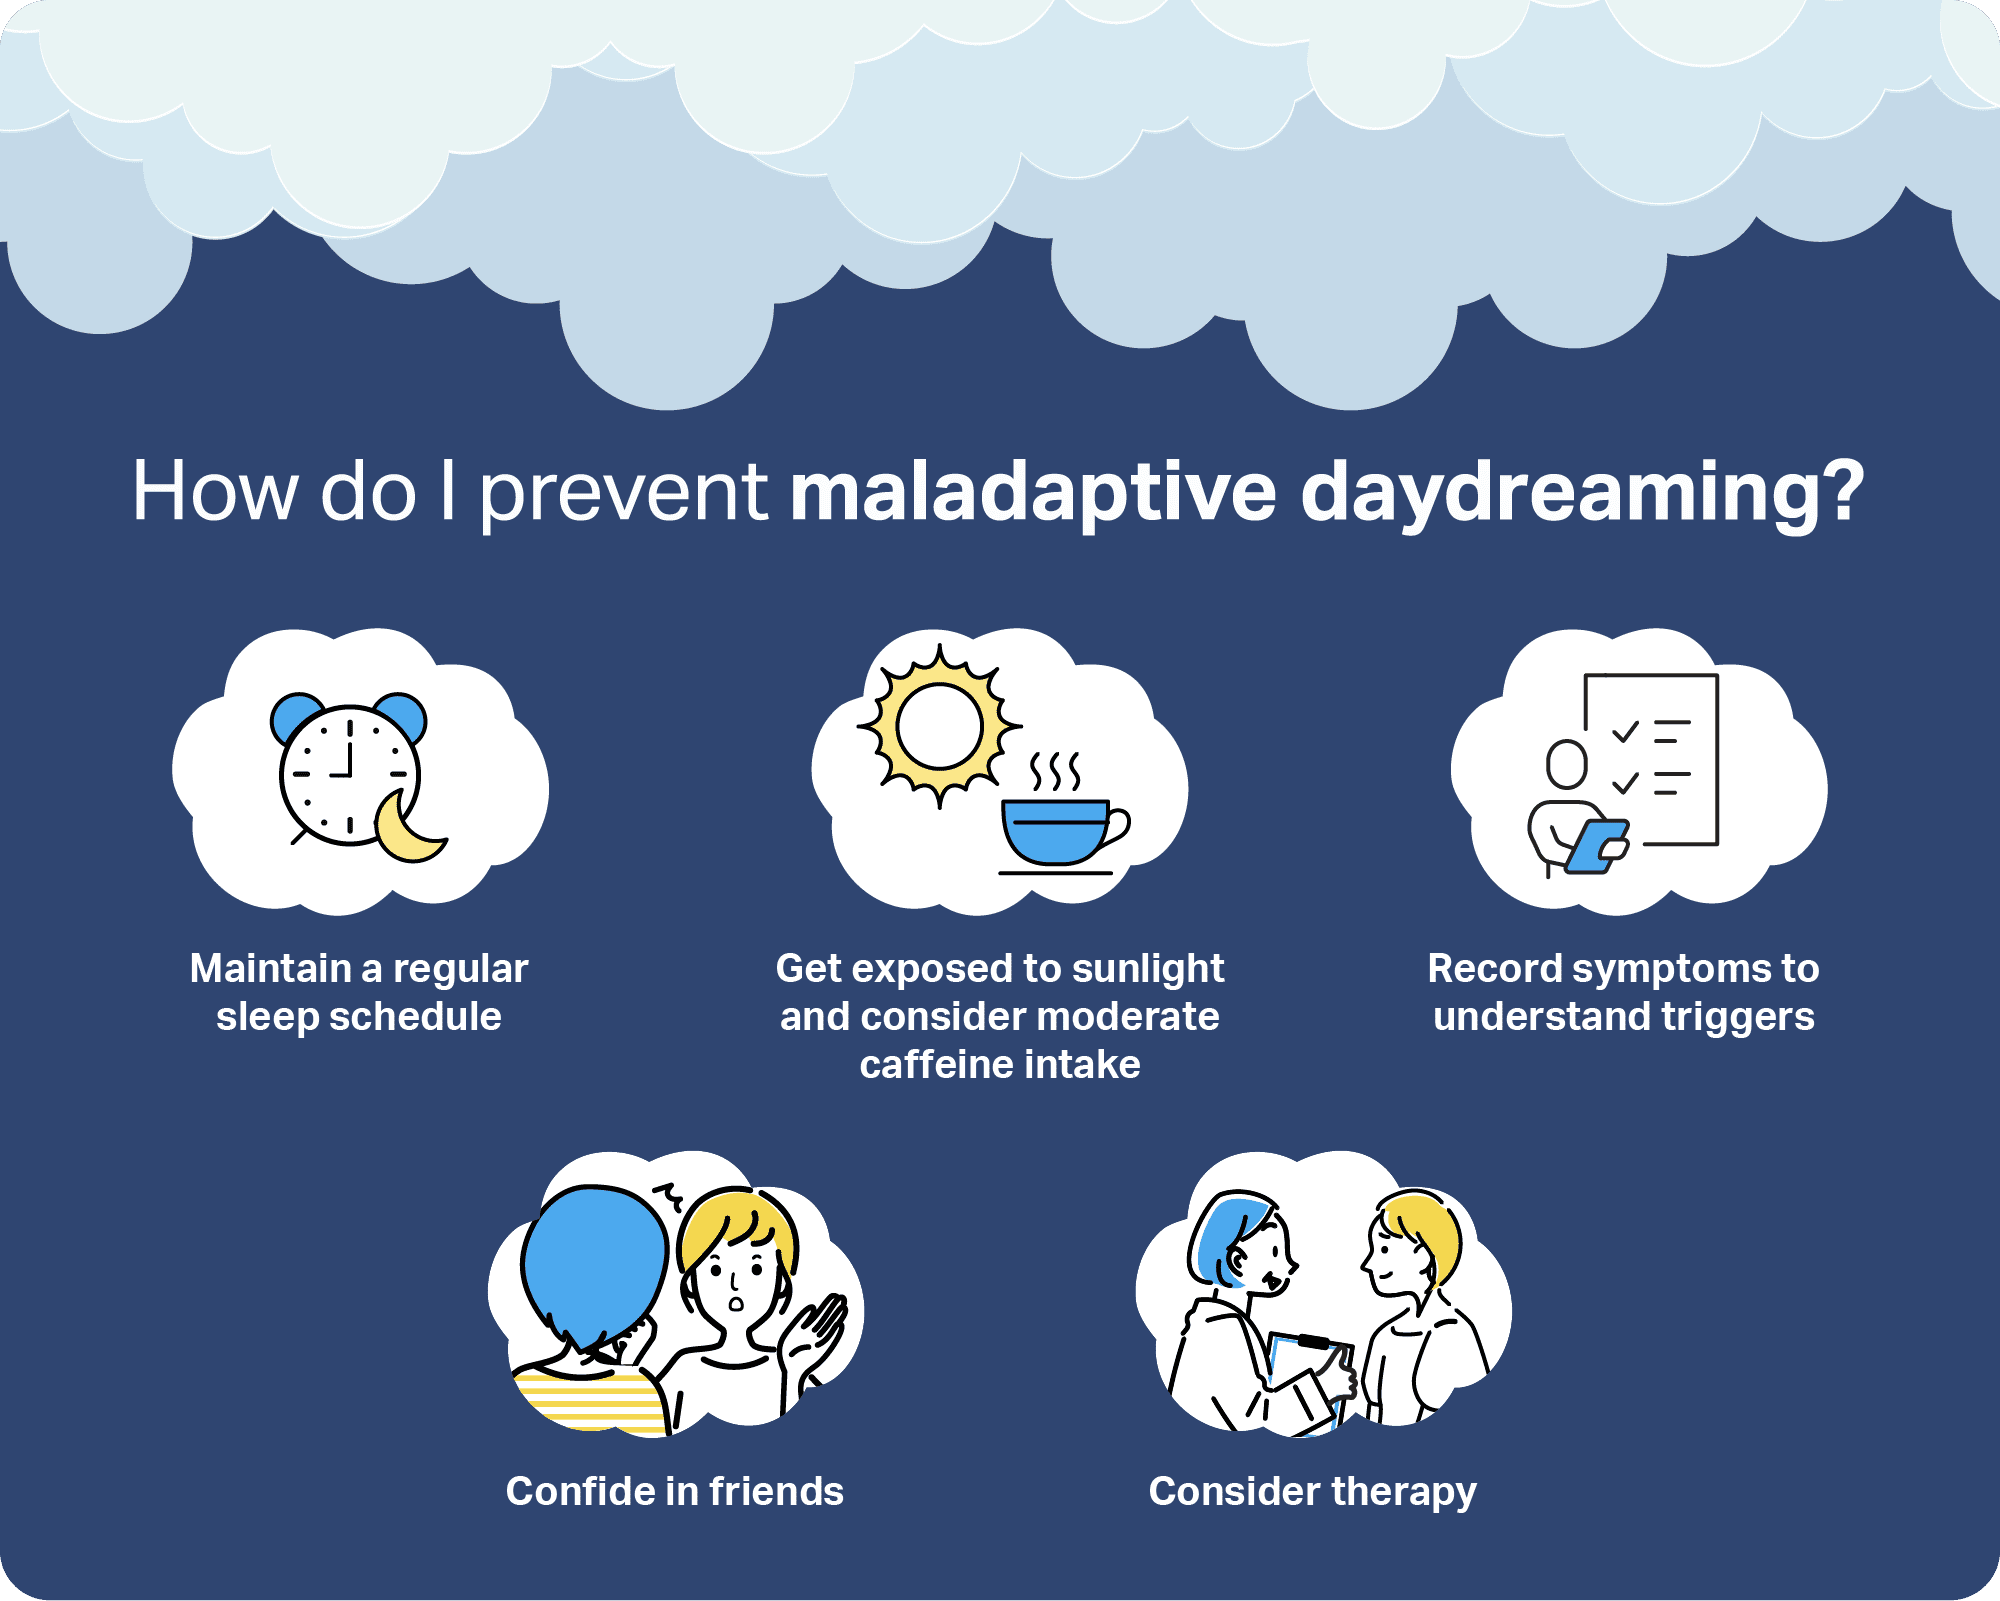 Infographic with tips to prevent maladaptive daydreaming